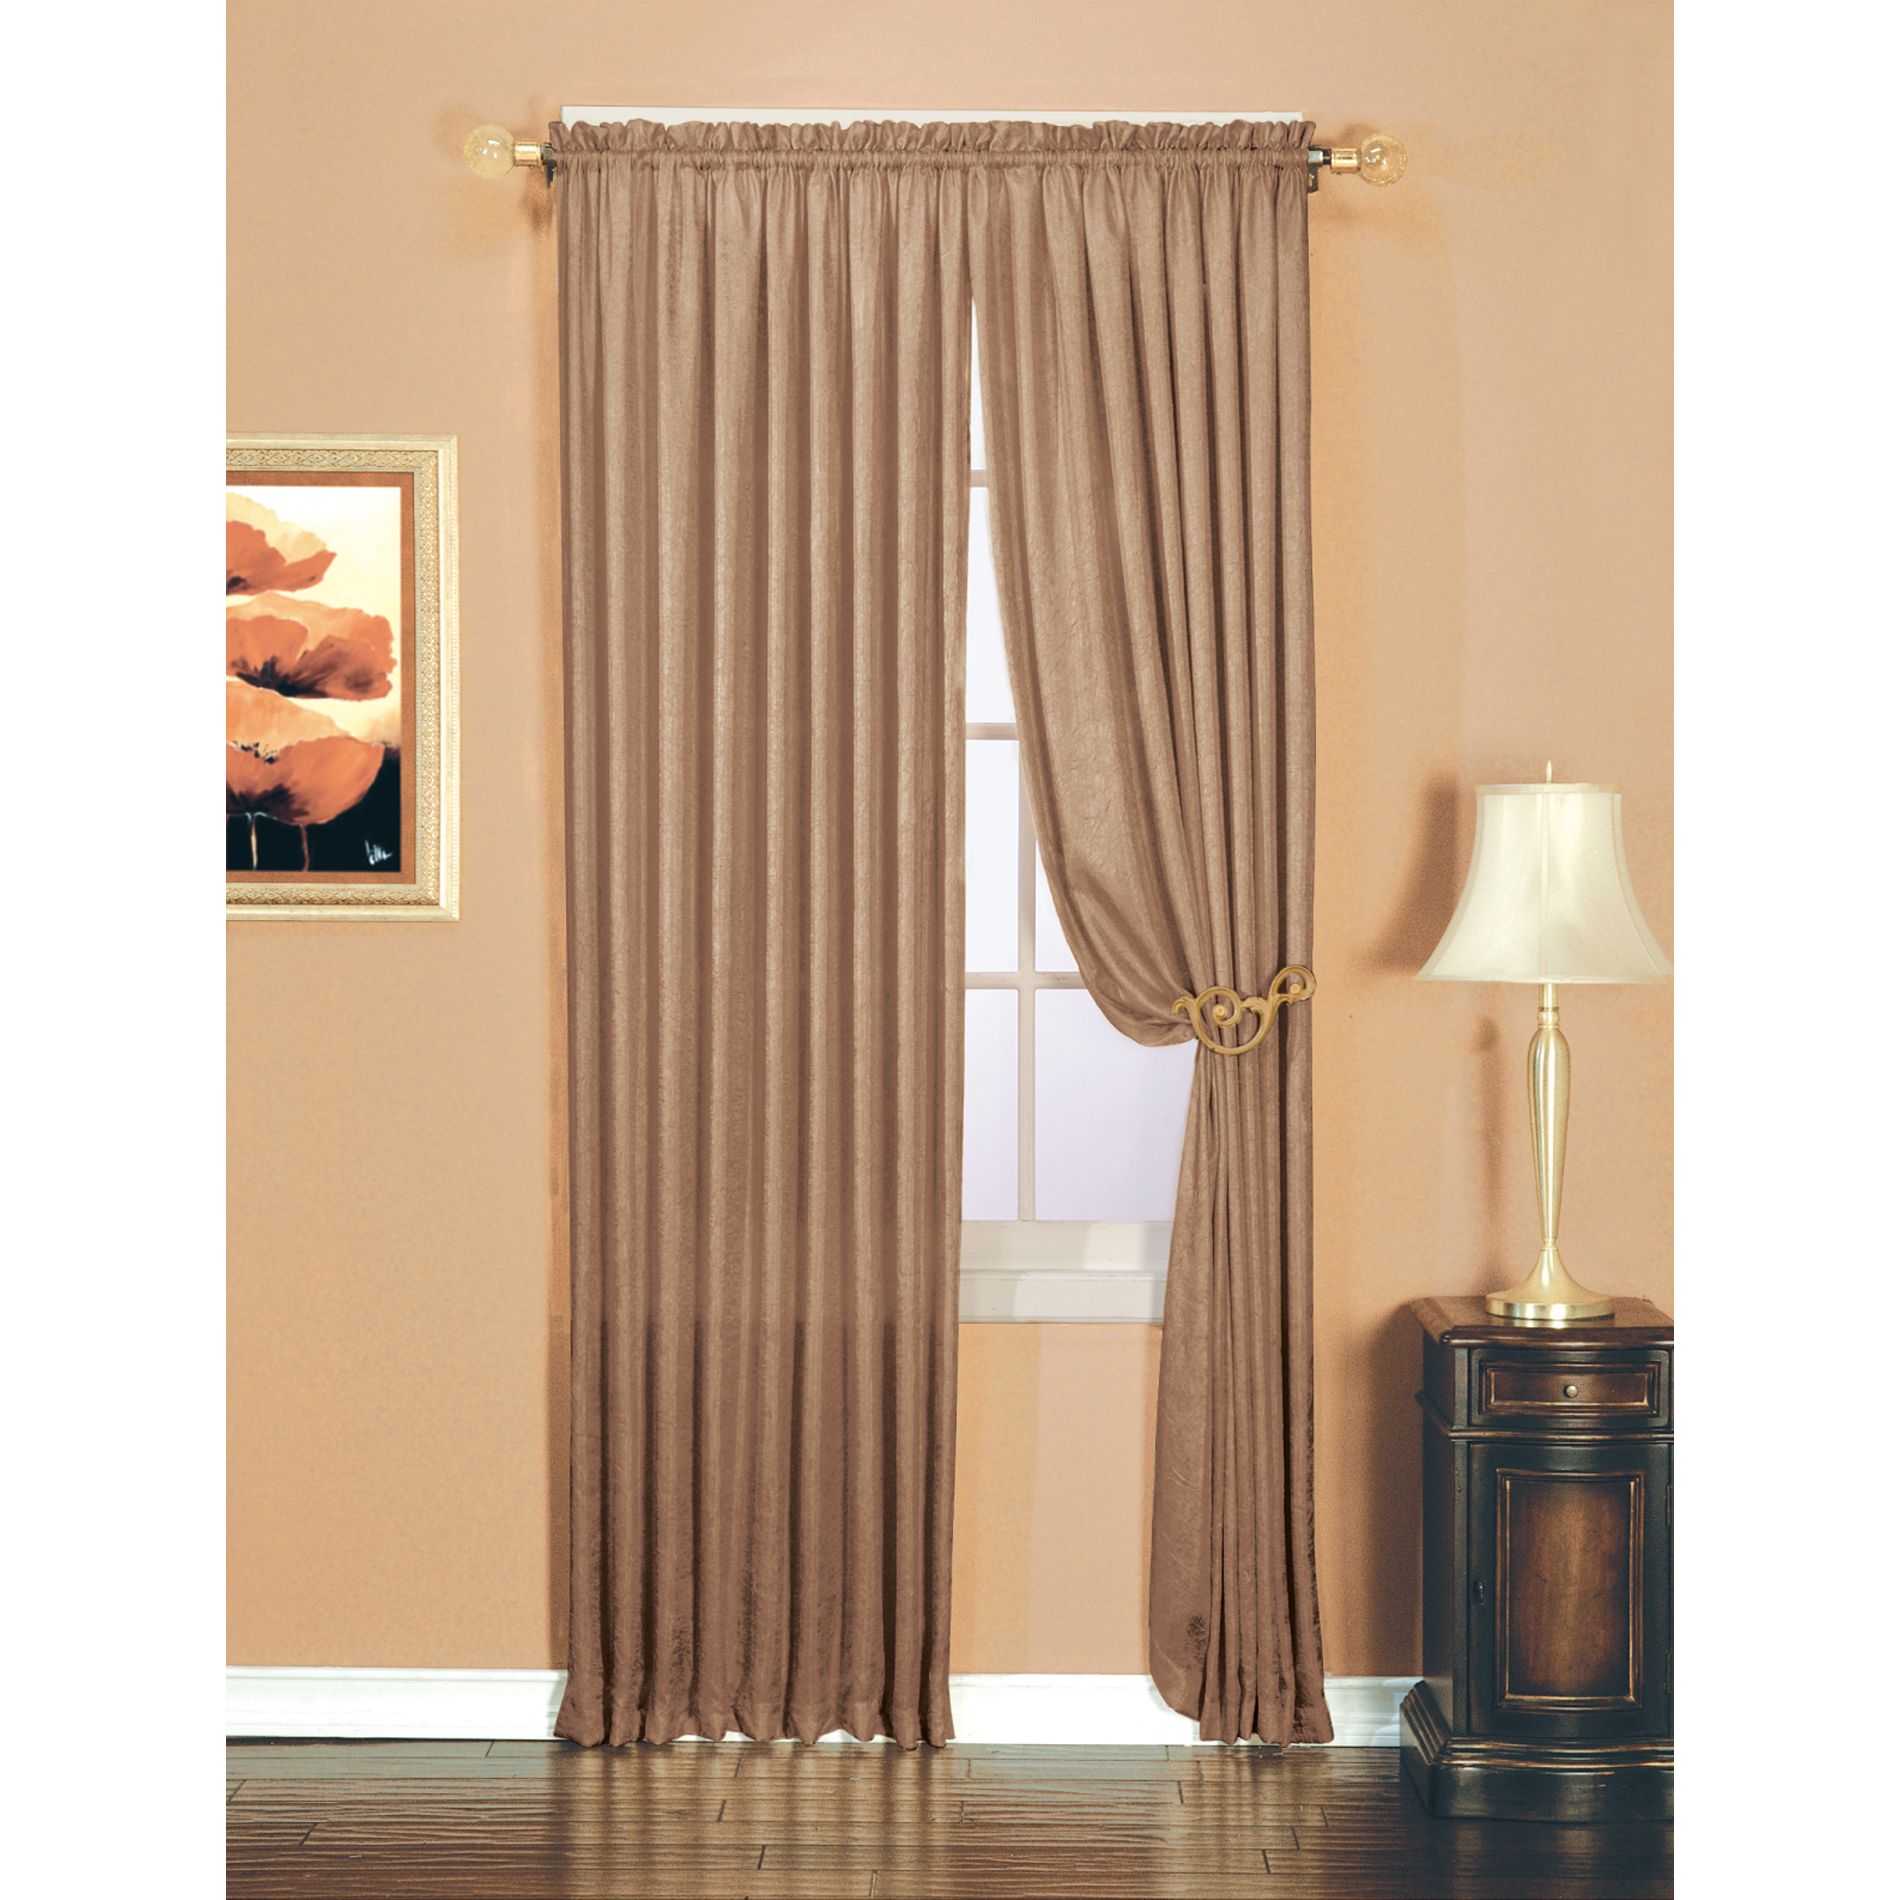 UPC 072000157688 product image for Essential Home Luxury Crushed Faux Silk Window Panel Taupe - KMART CORPORATION | upcitemdb.com